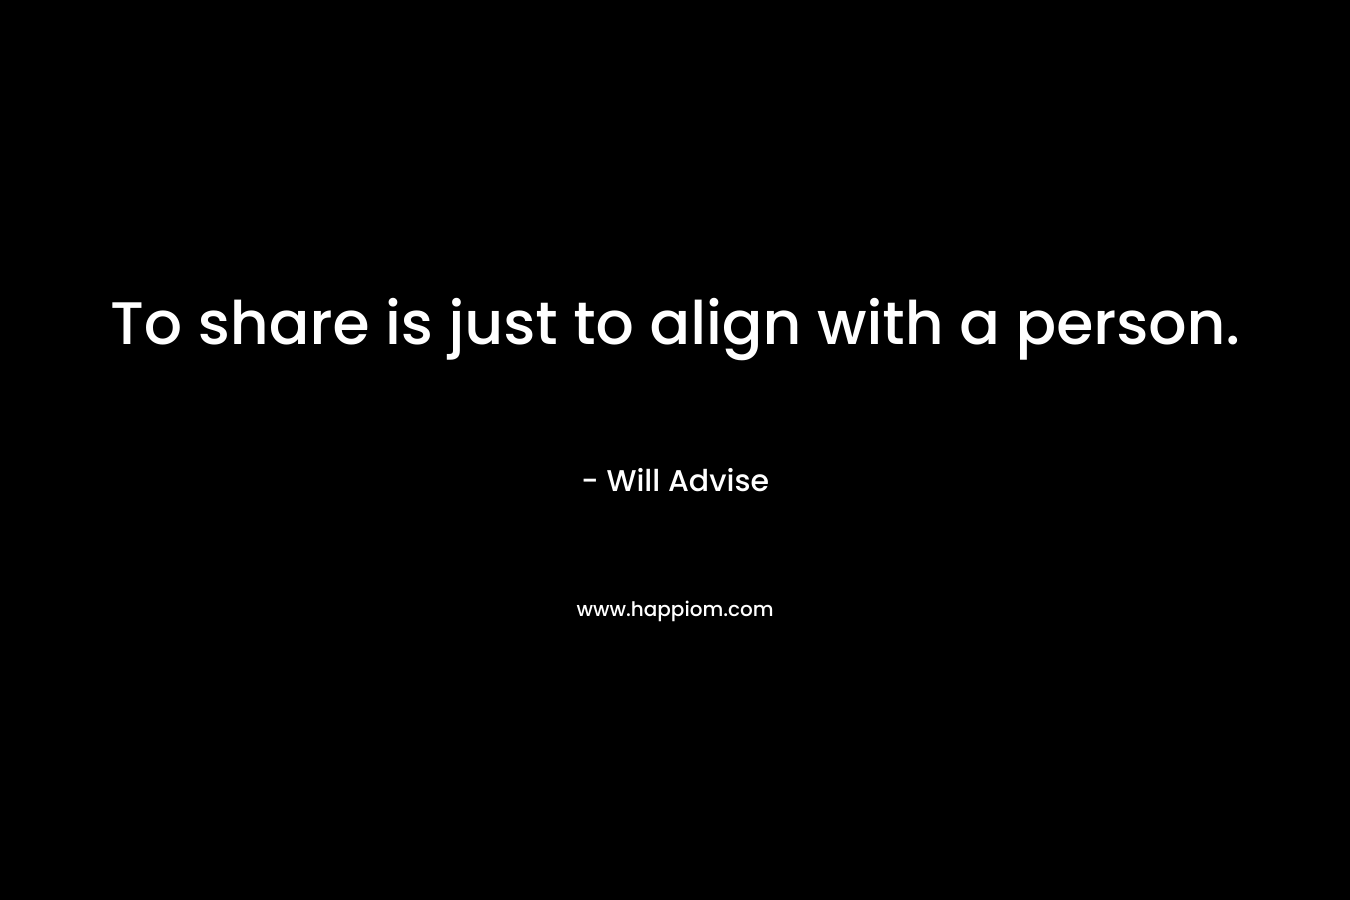 To share is just to align with a person.